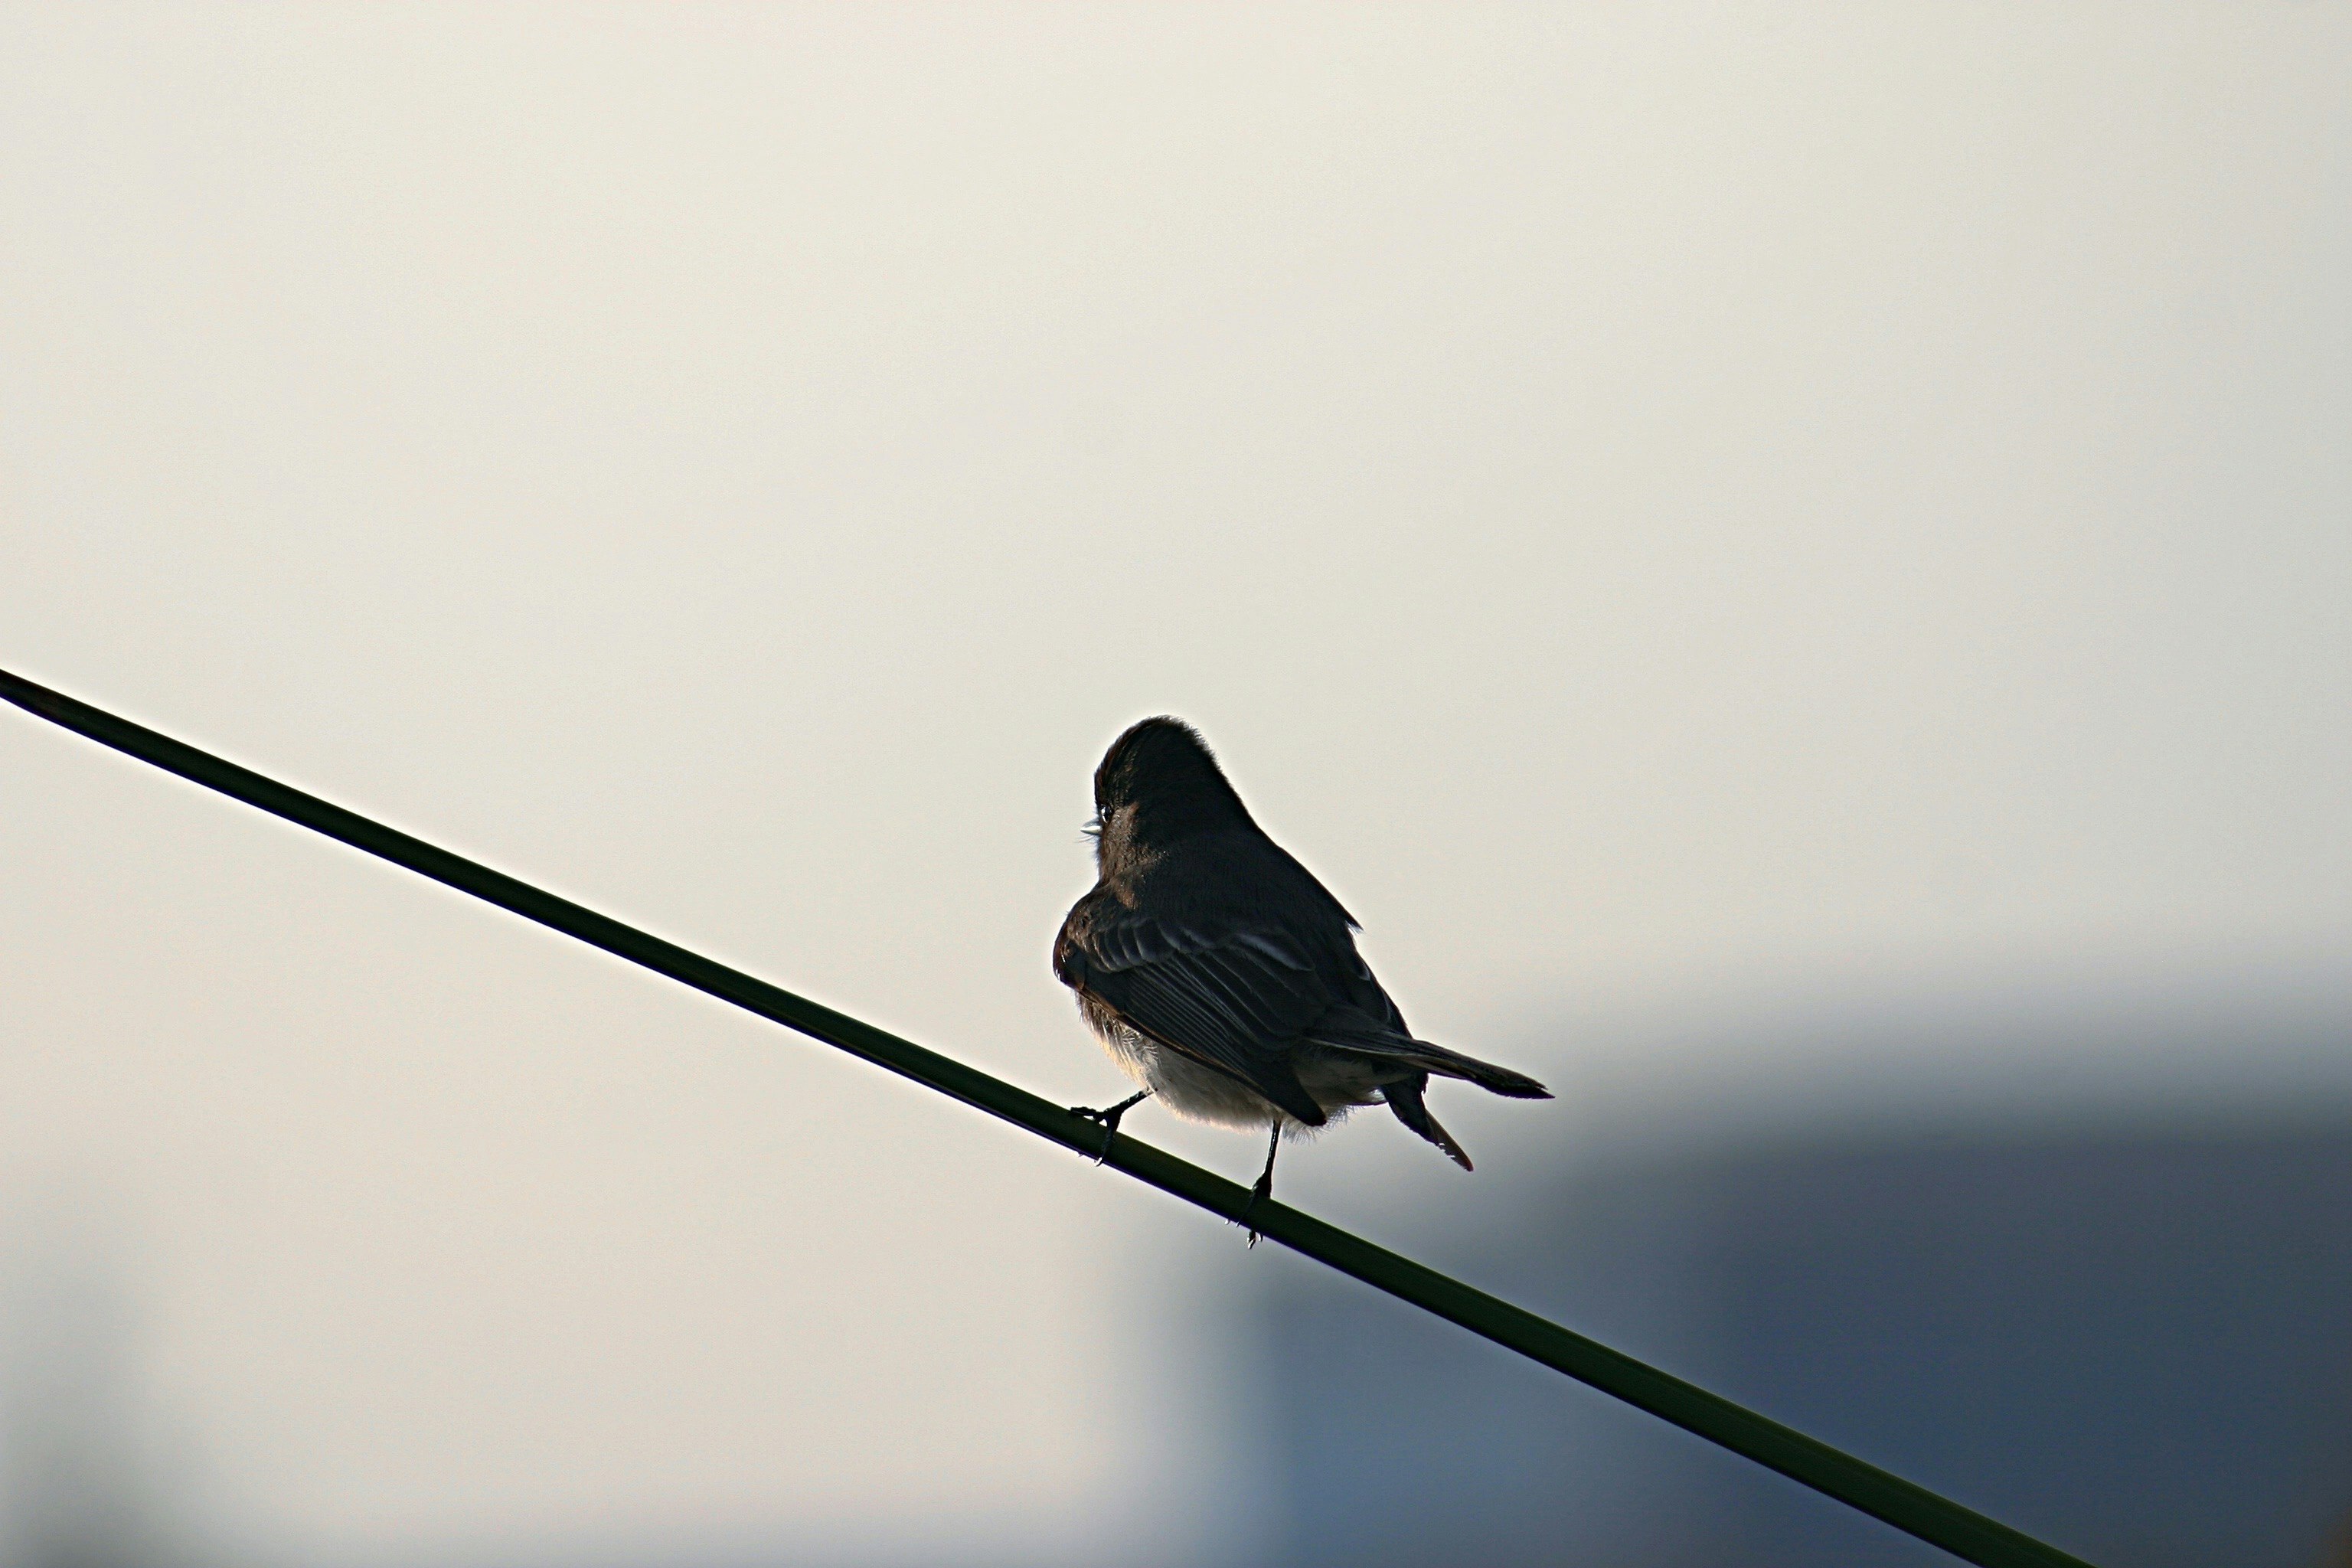 bird perched on wire